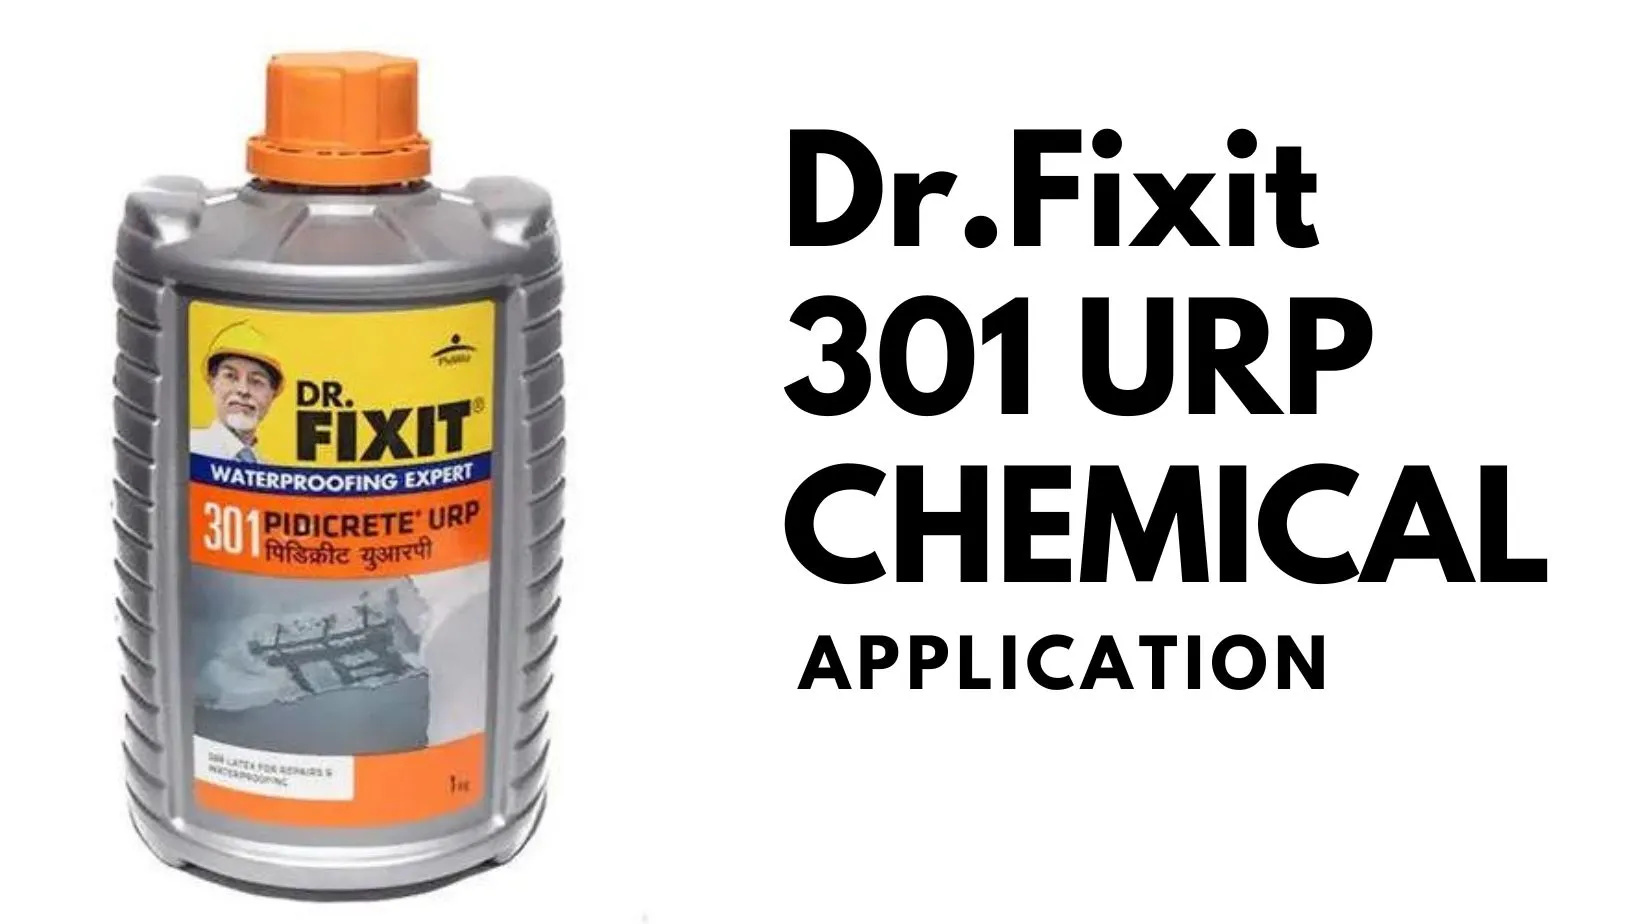 dr fixit 301 urp waterproofing chemical